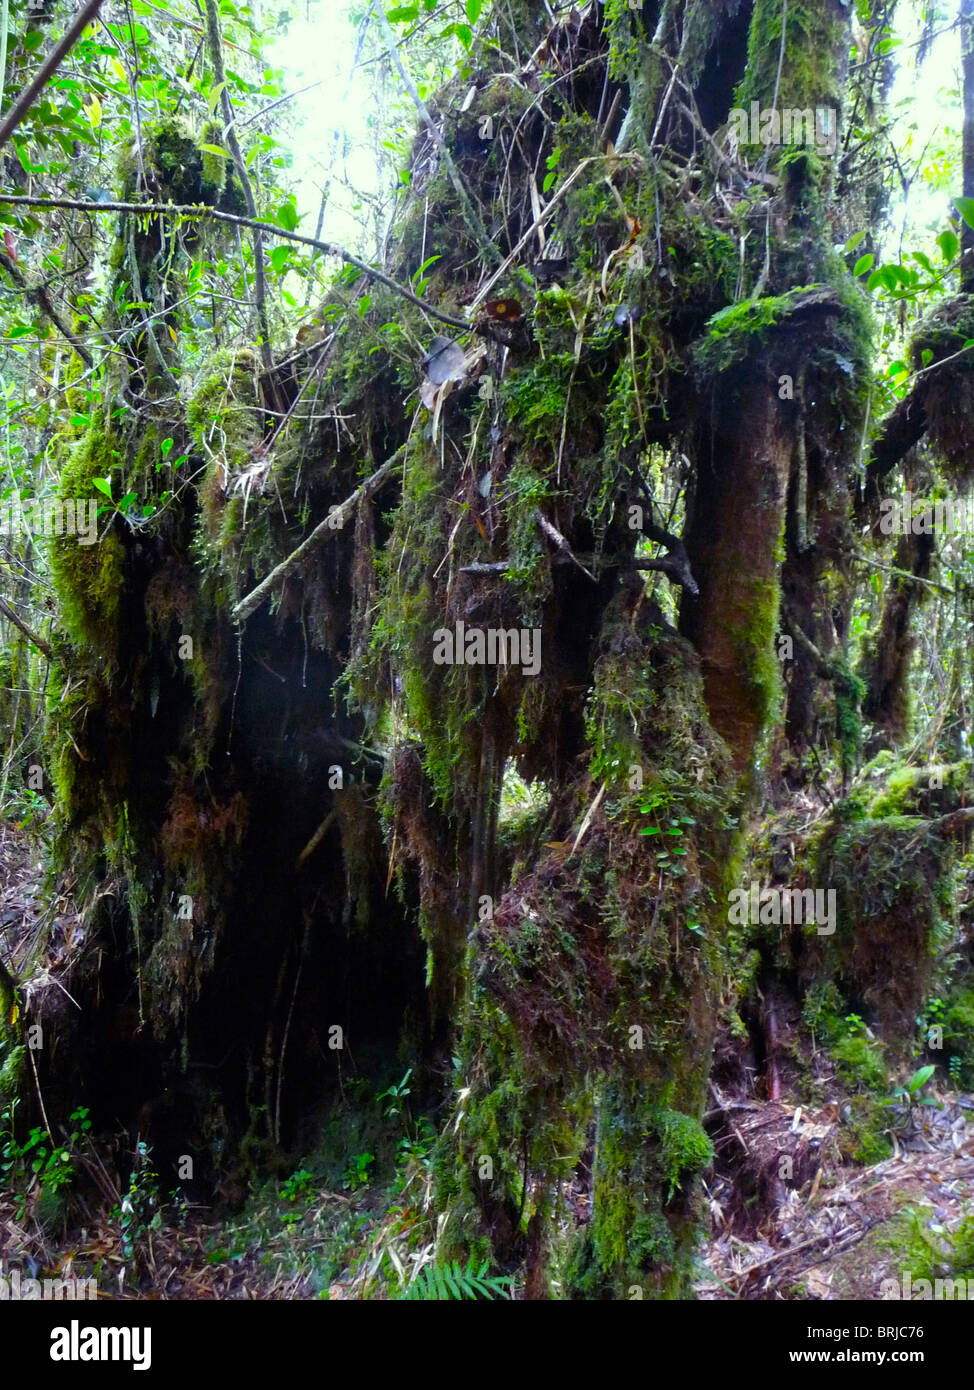 The tropical rain forests of the world continue to shrink in size due to the exploitation by mankind. Stock Photo